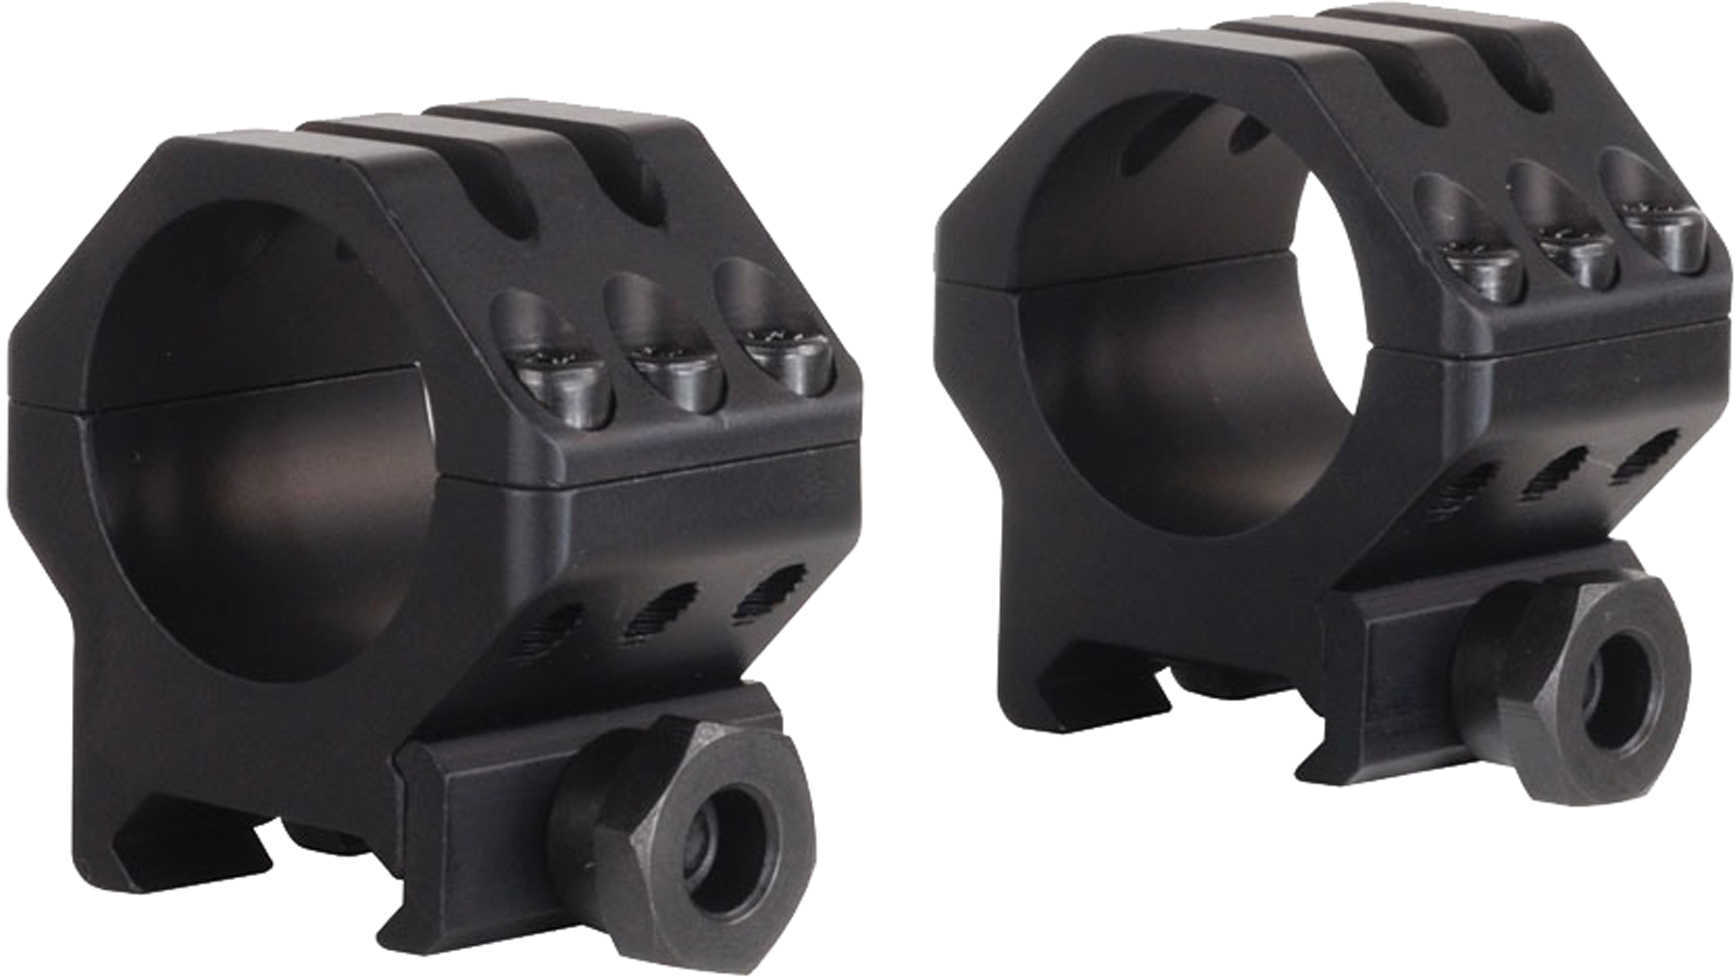 Weaver Tactical 6-Hole Picatinny Rings XX-High 1" - Features the same six screws for maximum security and c 99691